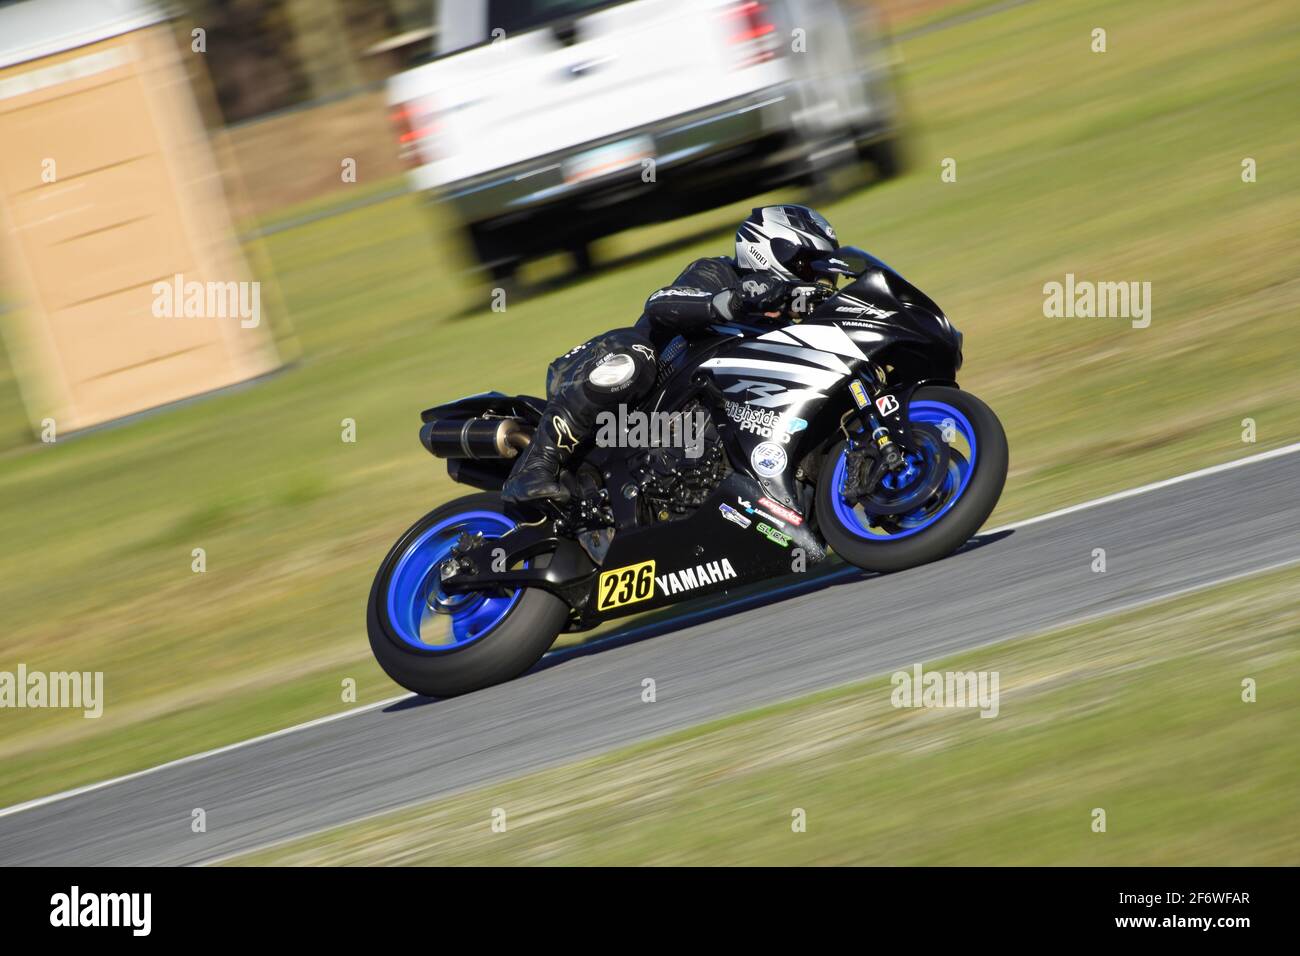 Yamaha R1 exits Turn 5 at Roebling Road Raceway during the Stickboy Racing track day in preparation for WERA Atlantic Coastal regional opener. Stock Photo